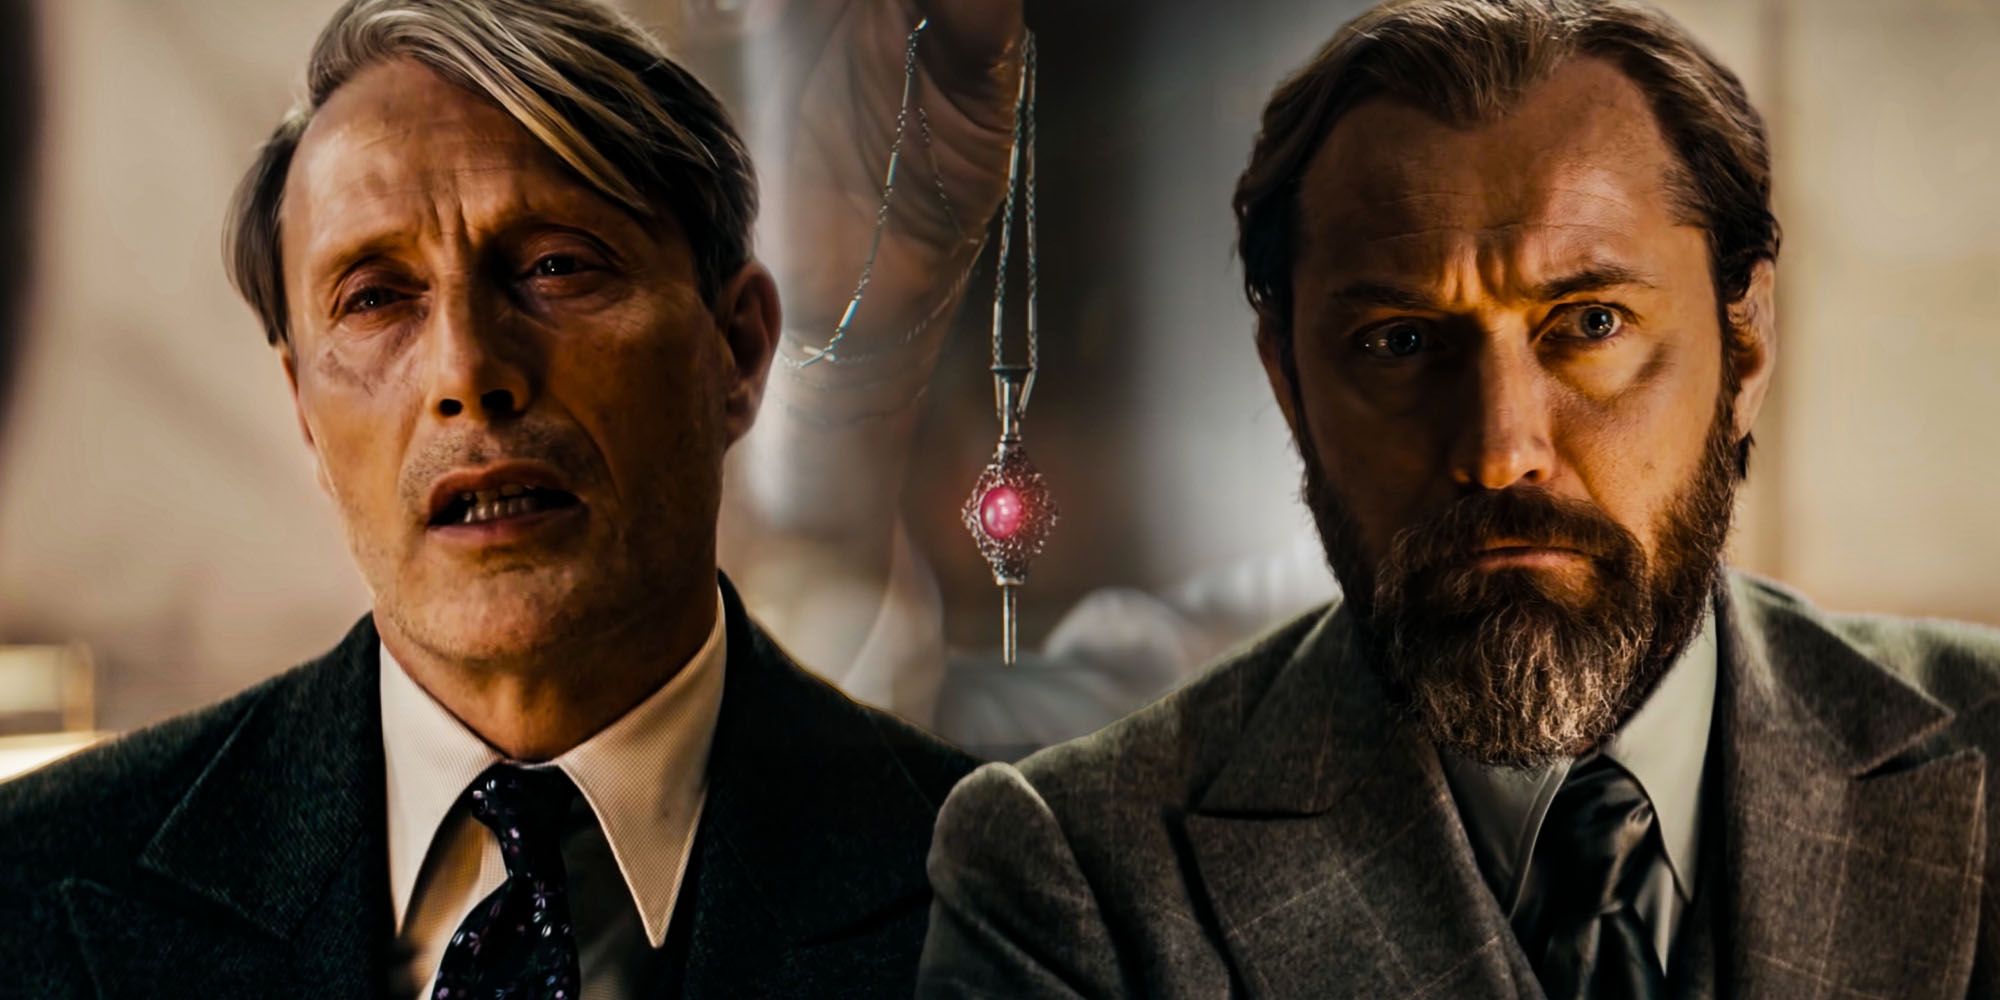 Blended images of Grindelwald, Dumbledore and their blood pact in Fantastic Beasts 3